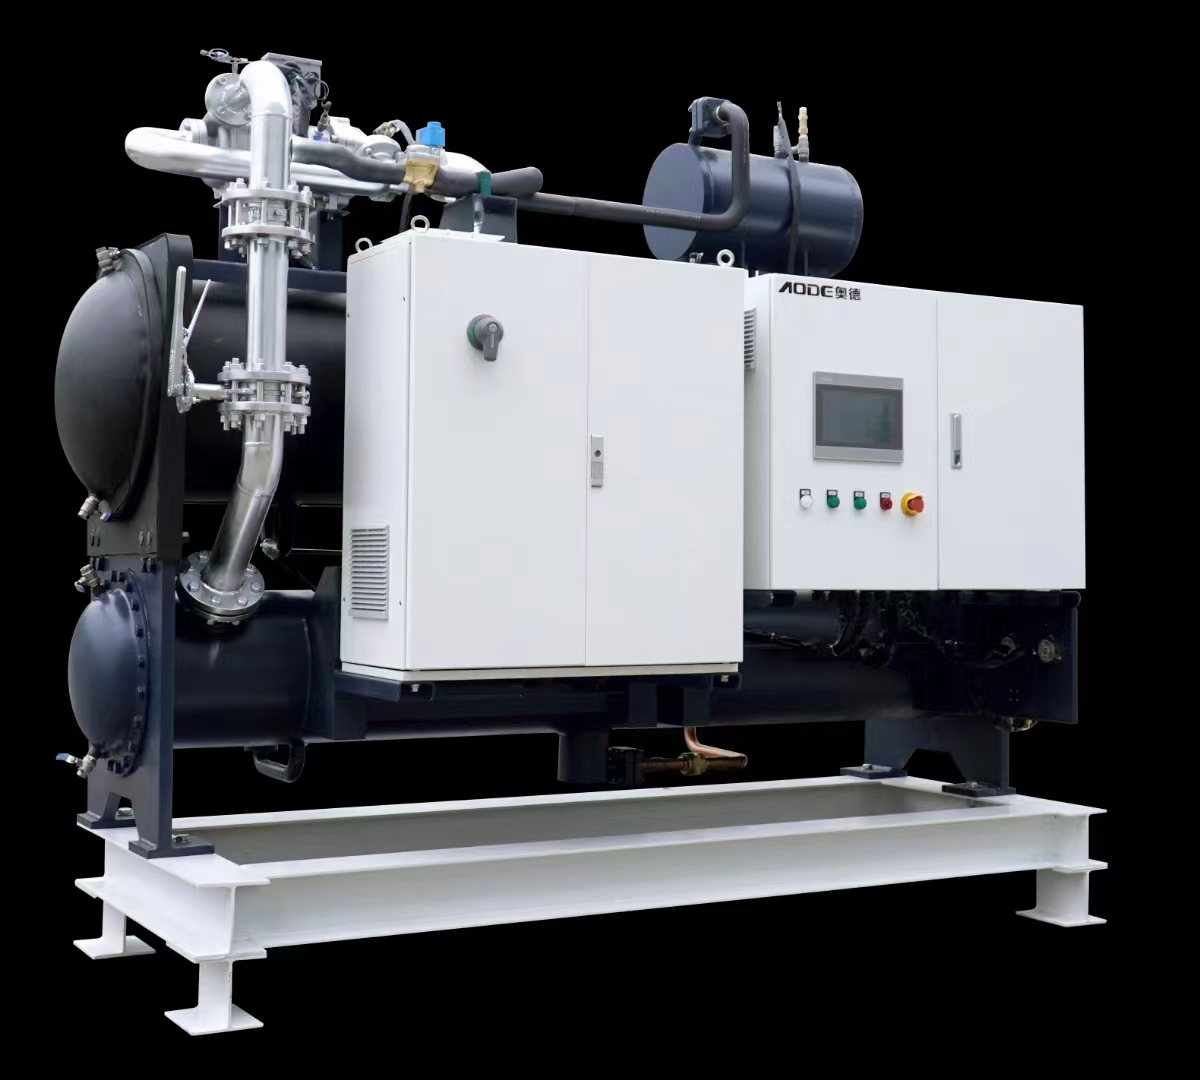 WATER-COOLED AIR SUSPENSION CENTRIFUGAL CHILLER